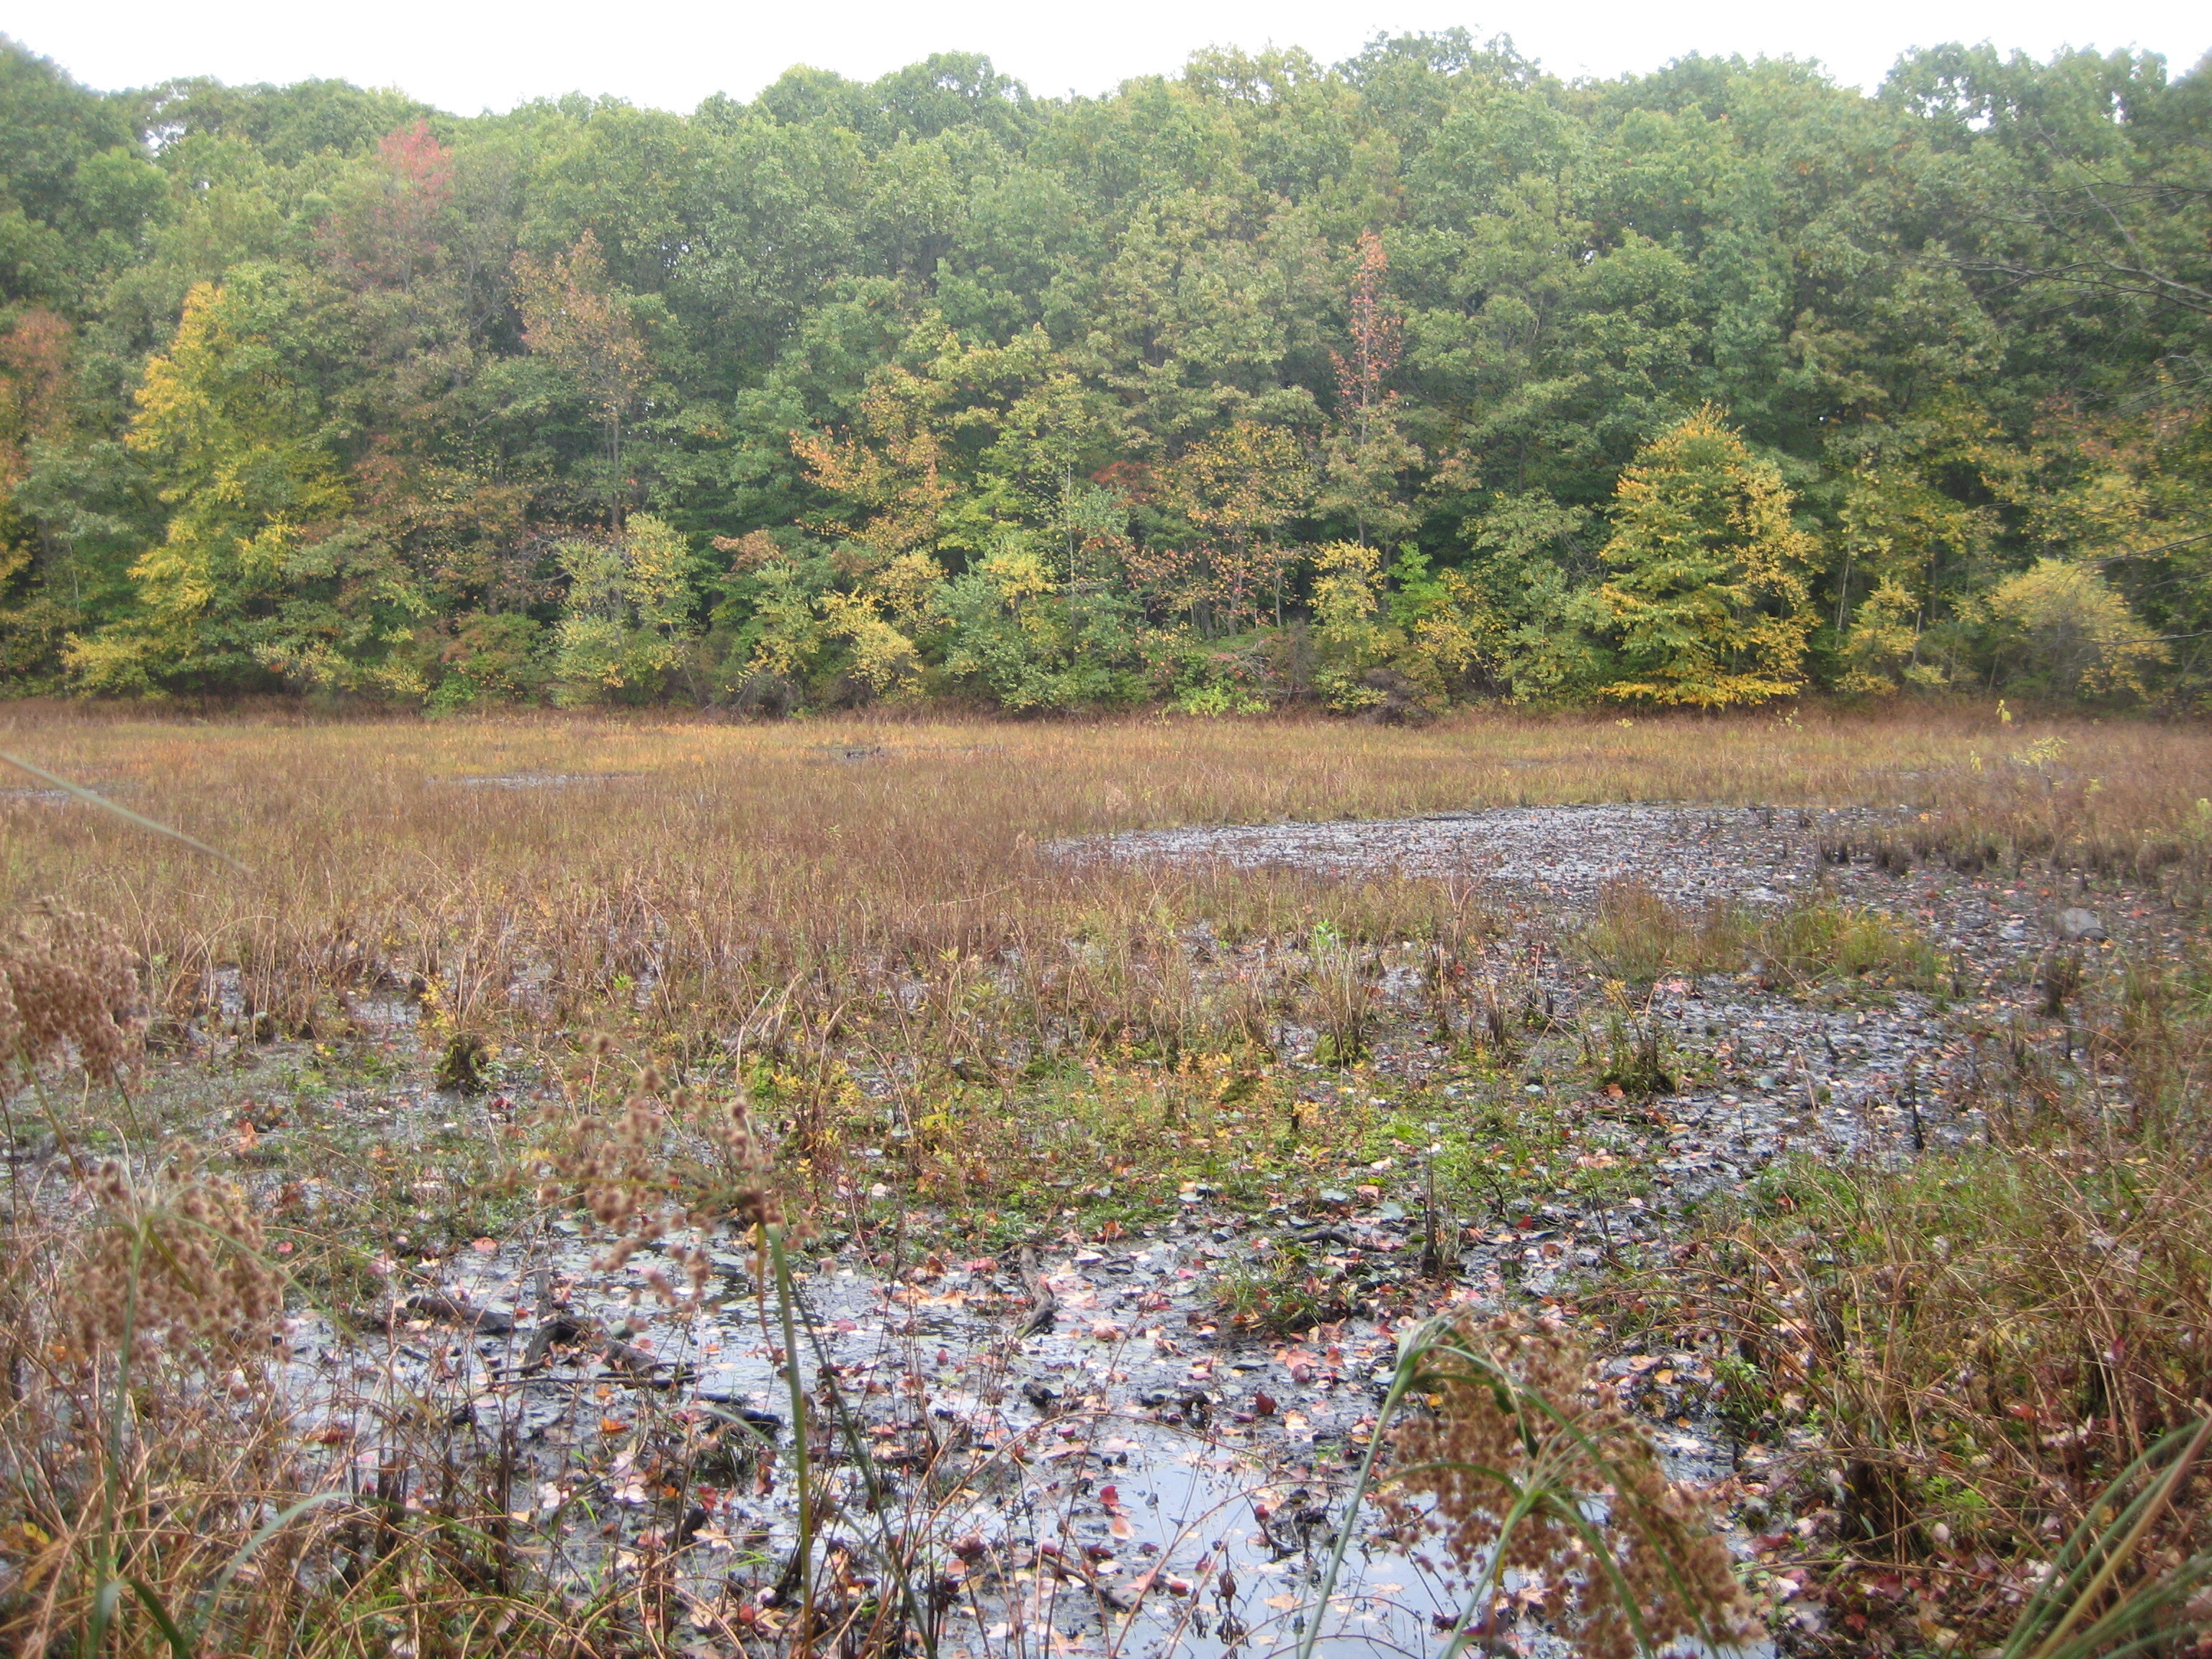 Staten Island hosts a great variety of protected wetland habitats including ponds, streams, bogs, and marsh. <a href="https://www.flickr.com/photos/turducken/10369833635" target="_blank" >Photo</a>: TheTurducken/<a href="https://creativecommons.org/licenses/by-nc/2.0/" target="_blank" >CC BY 2.0</a>